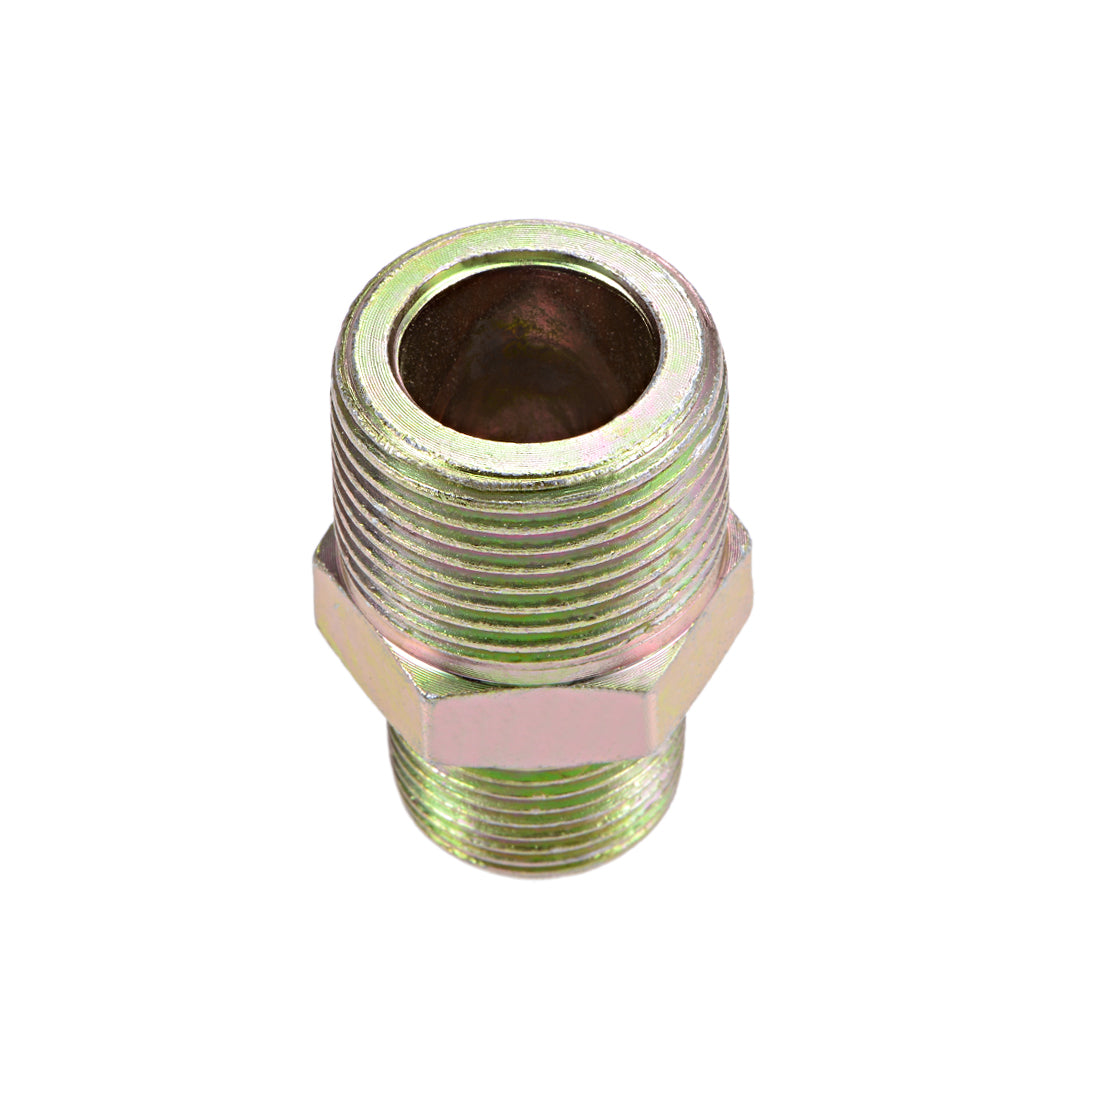 Uxcell Uxcell Reducing Pipe Fitting - Reducer Hex - 1PT x 3/4BSP Male